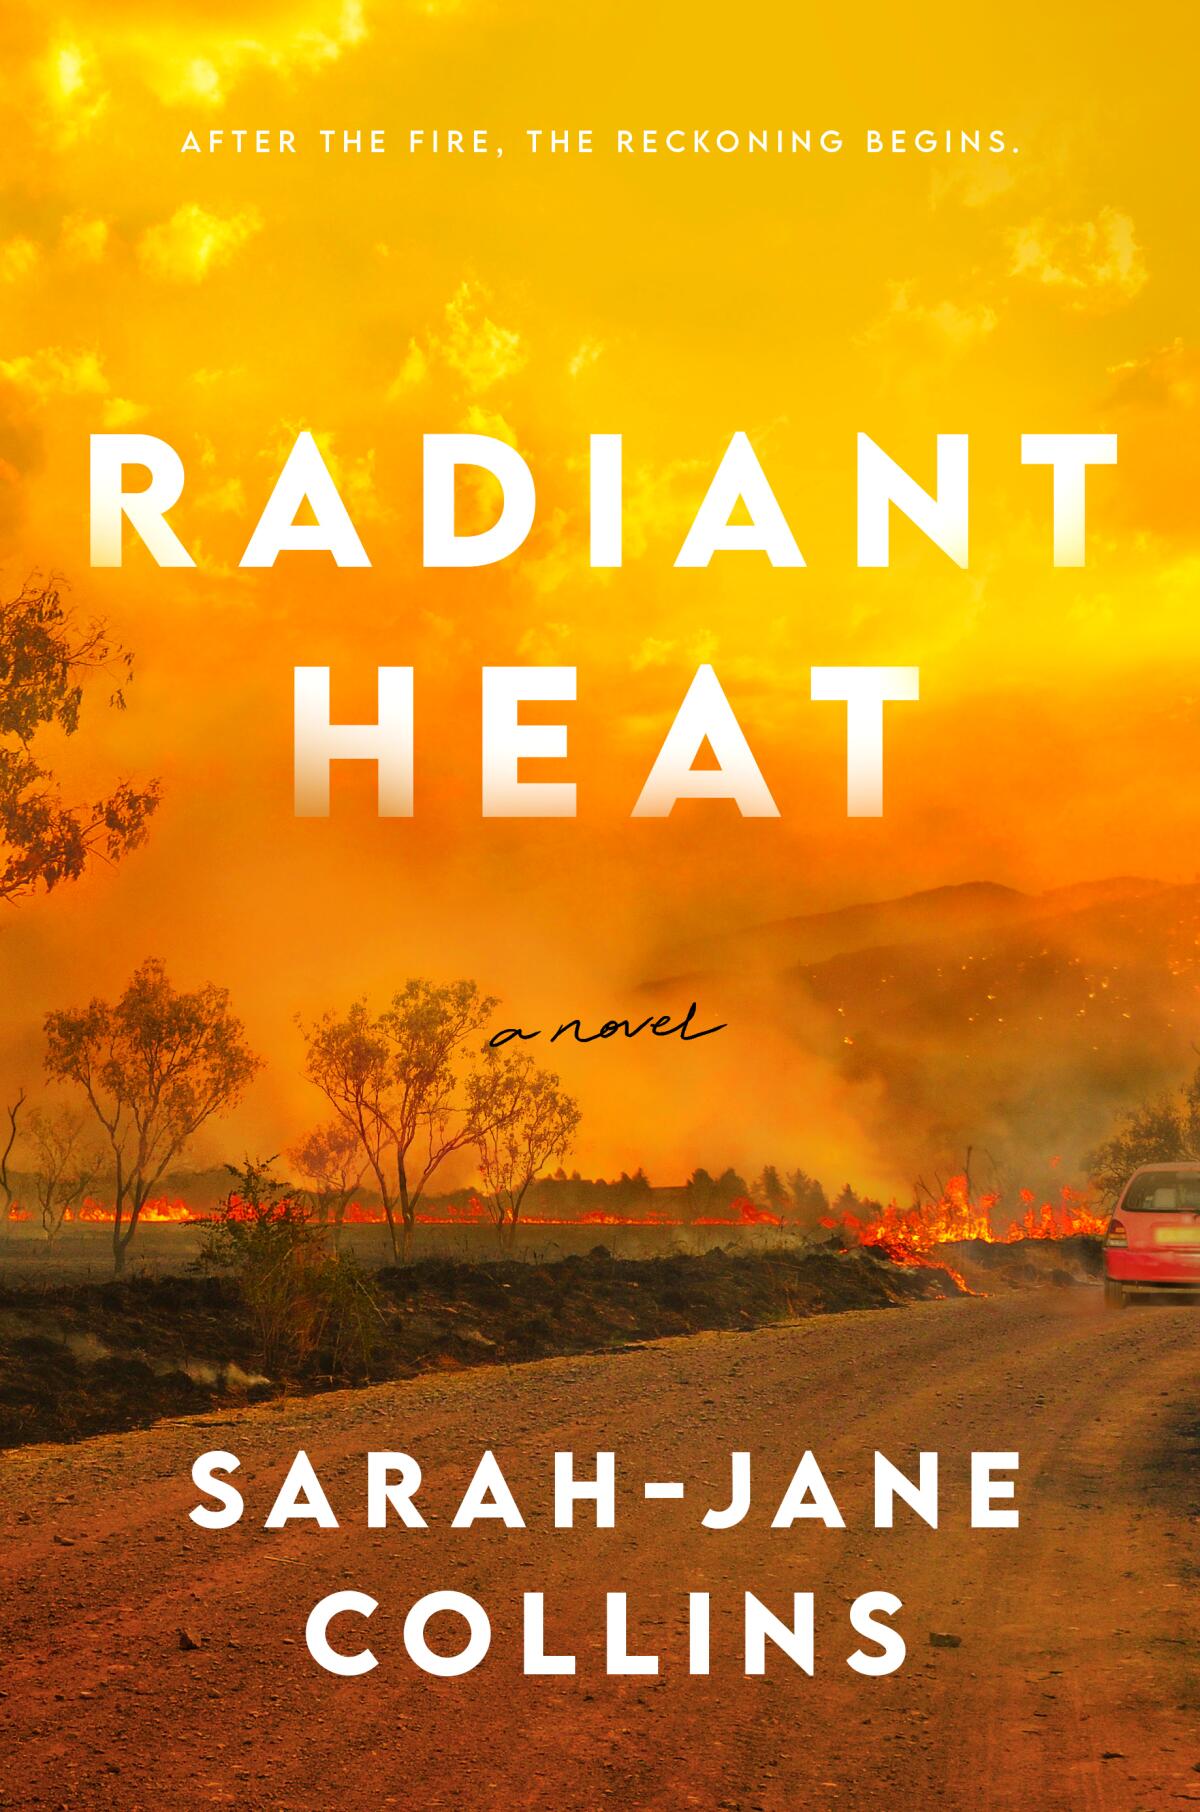 Cover of "Radiant Heat" by Sarah-Jane Collins